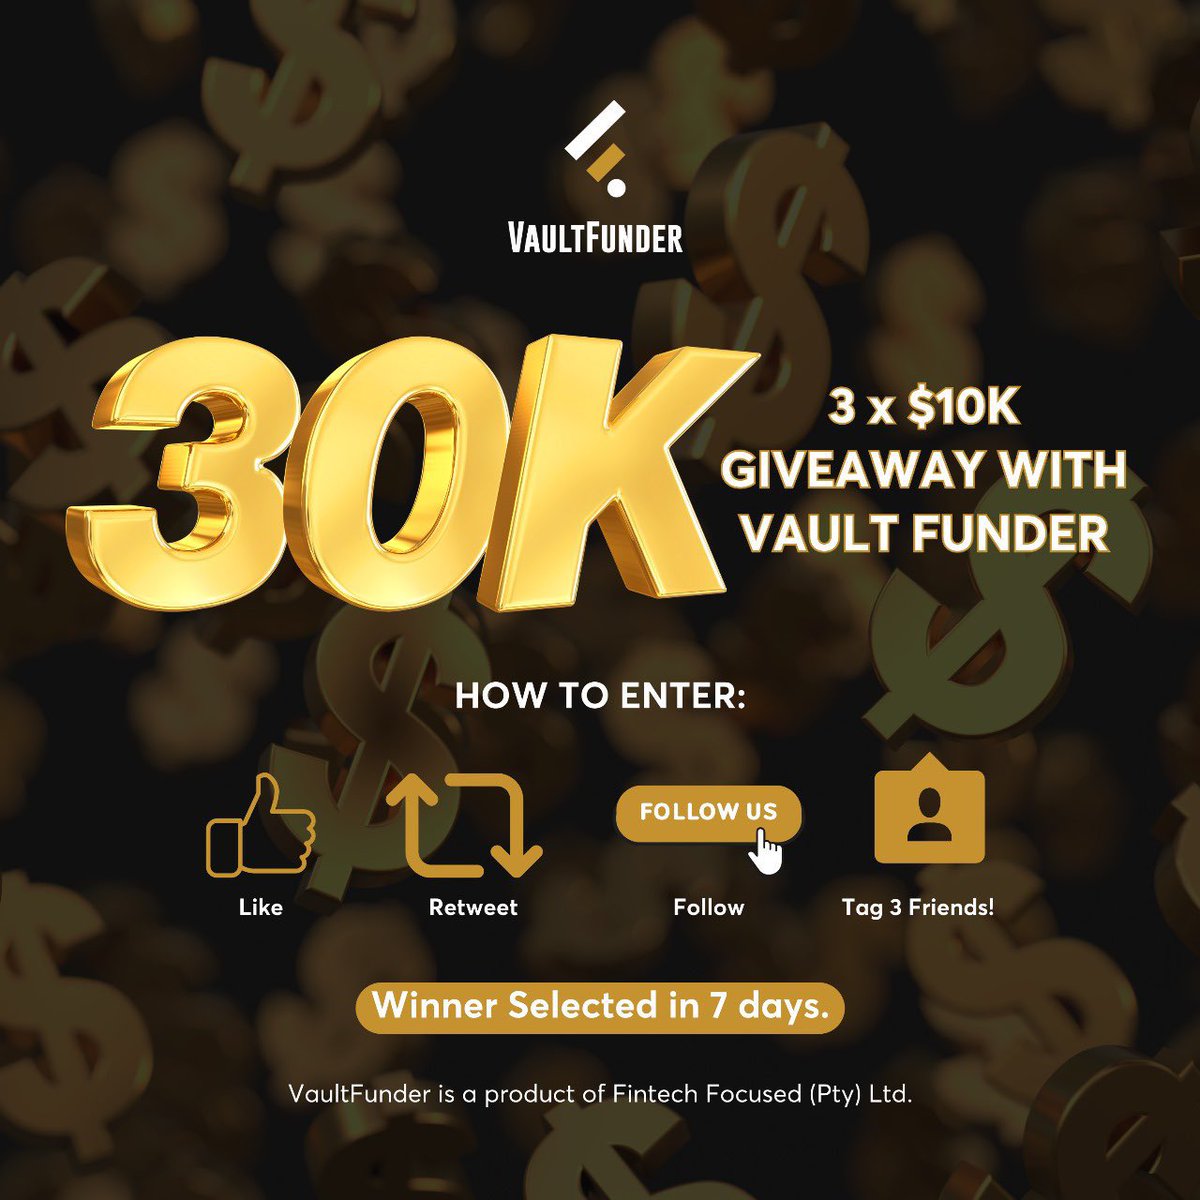 Giveaway Alert! x3 $10k Two Step Accounts! To enter: You need to follow @VaultFunder @realaditrades @CMarketbull Also follow @_iamdaedae_fr @Bumojja_Benjie @kiggundurober1 1⃣ Tag 3 friends 2⃣ Like & Repost & Comment 3⃣ Ends in 7 days On Notifications❗️❗️